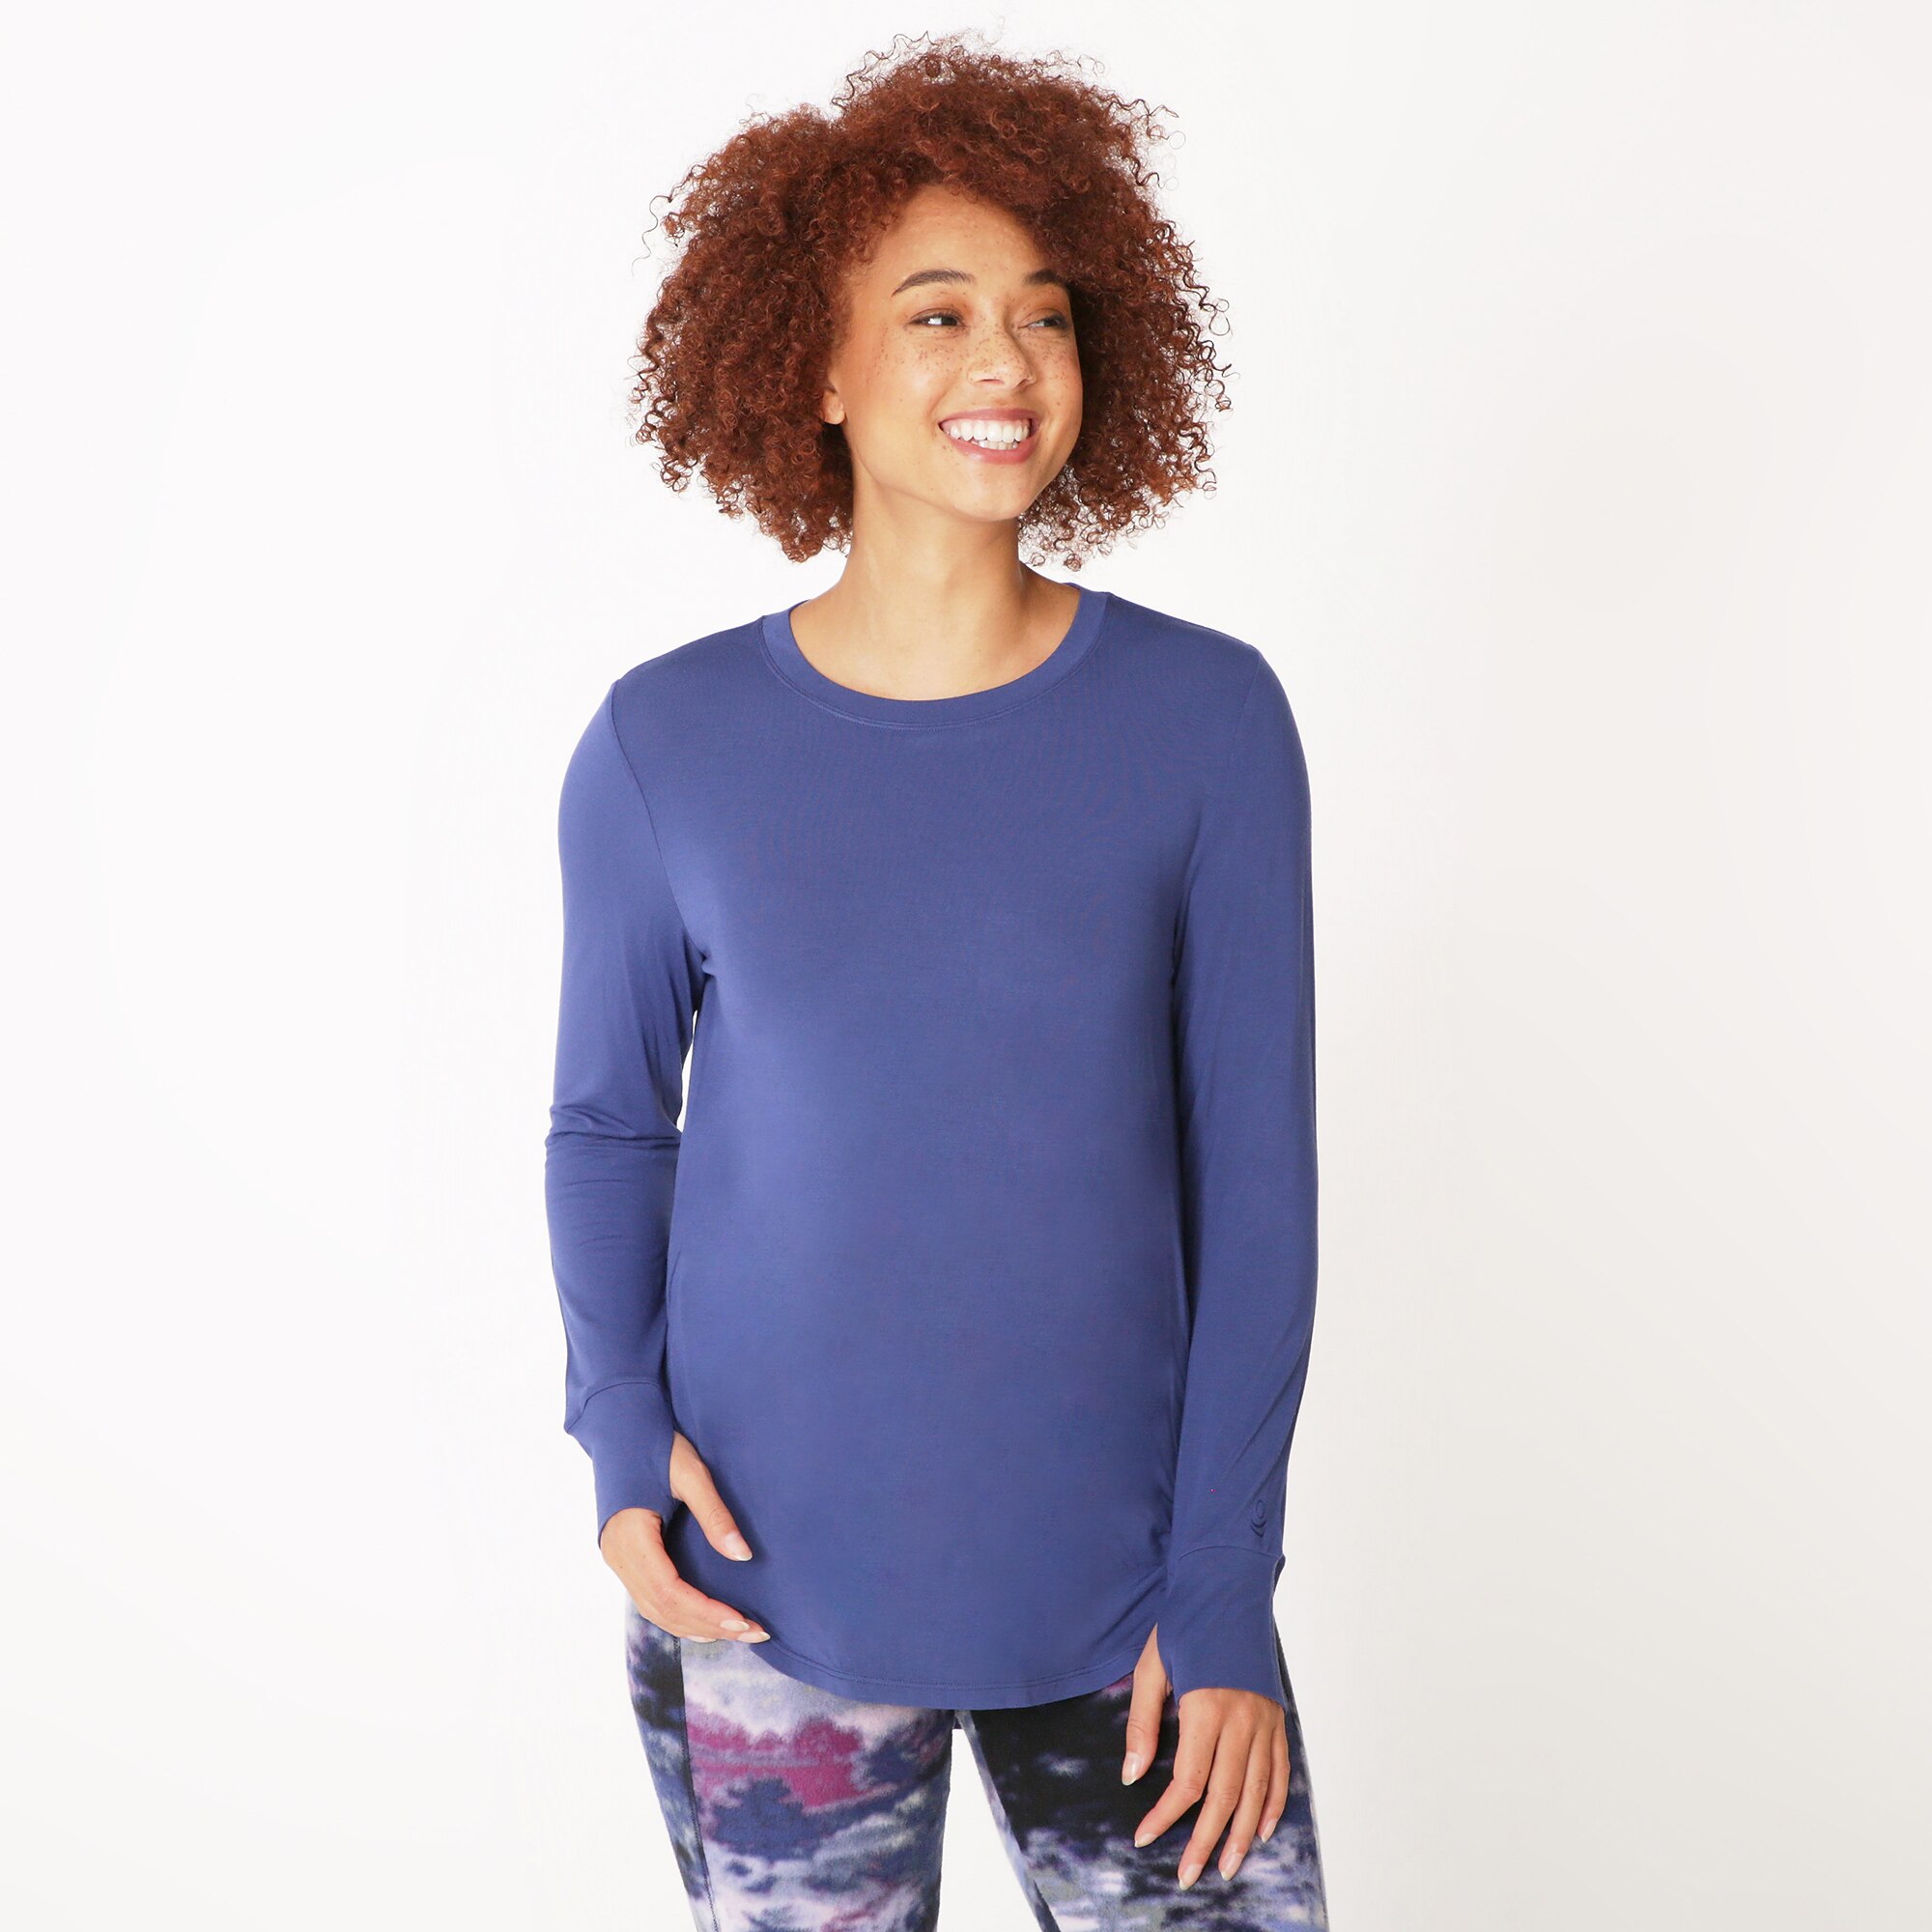 Cuddl Duds Womens Softwear with Stretch Long Sleeve Crew Neck Top 